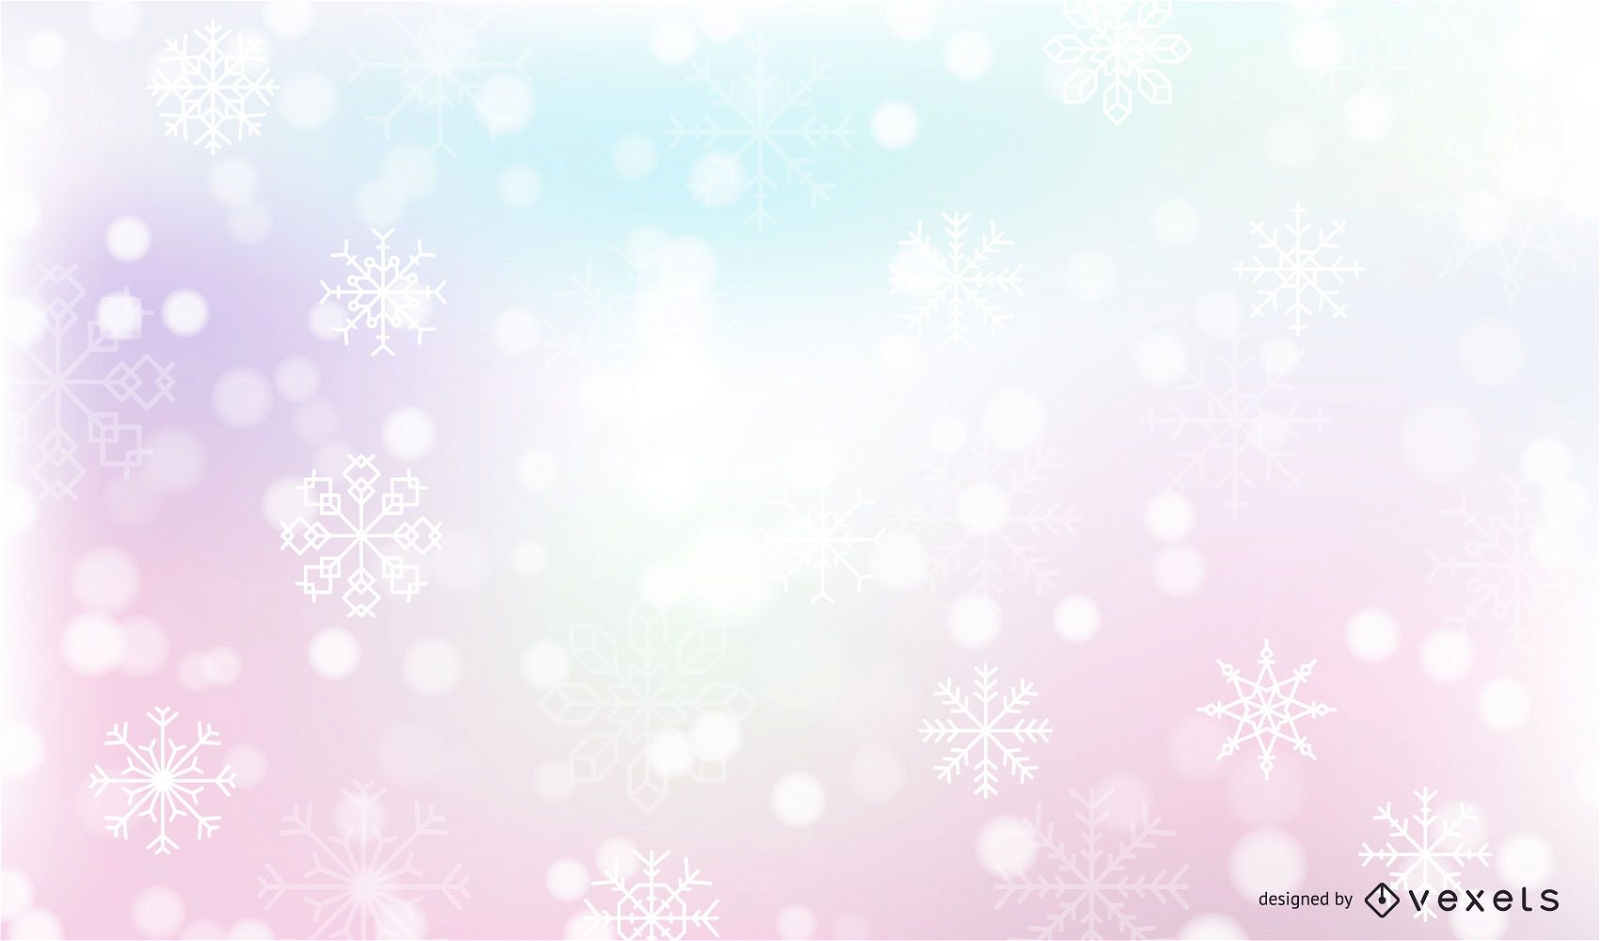 Falling snow winter background